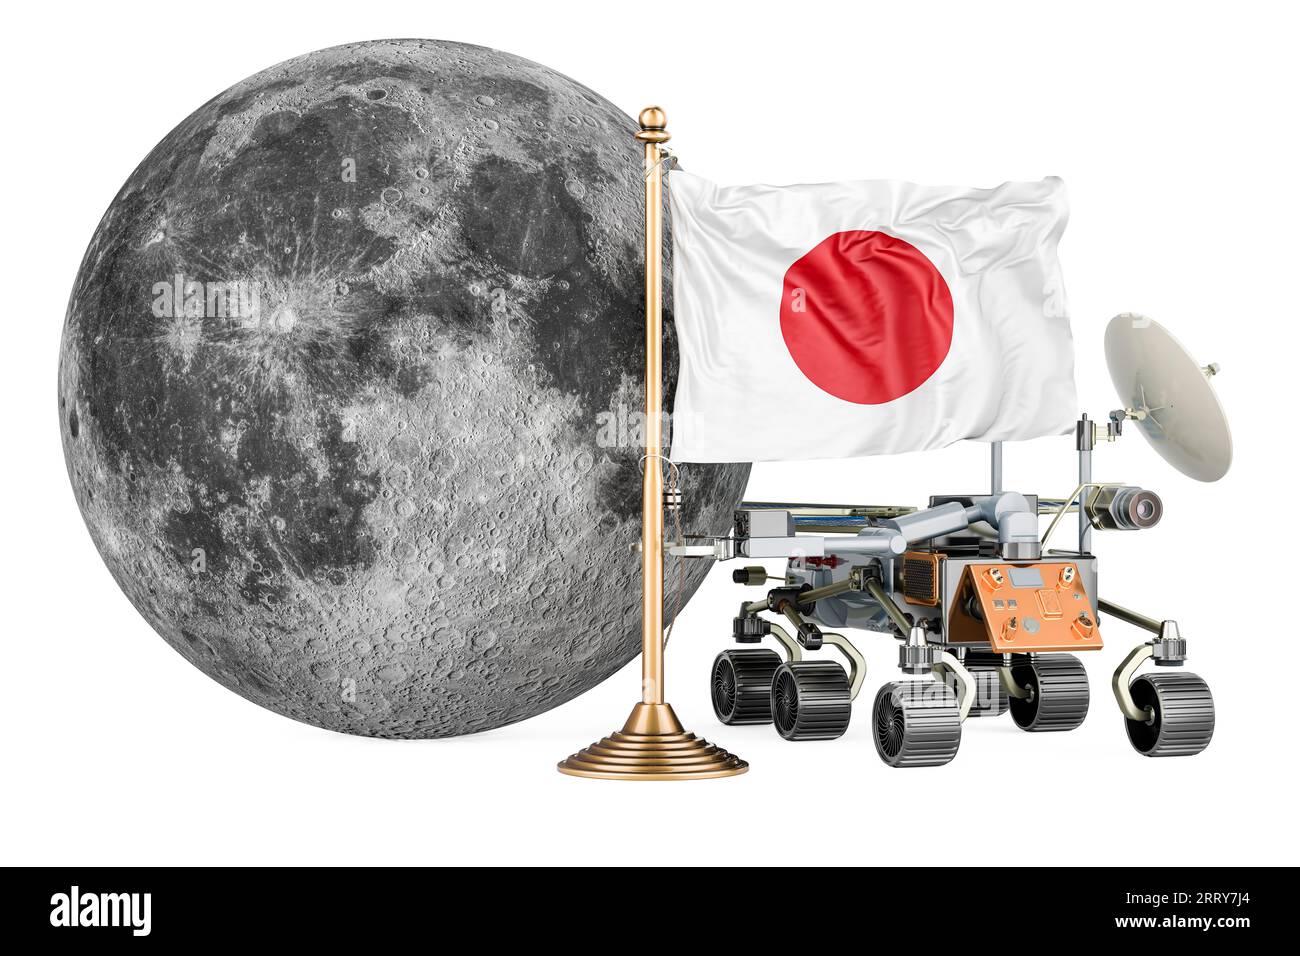 Japanese Lunar Exploration Program. Planetary rover with Moon and Japanese flag. 3D rendering isolated on white background Stock Photo